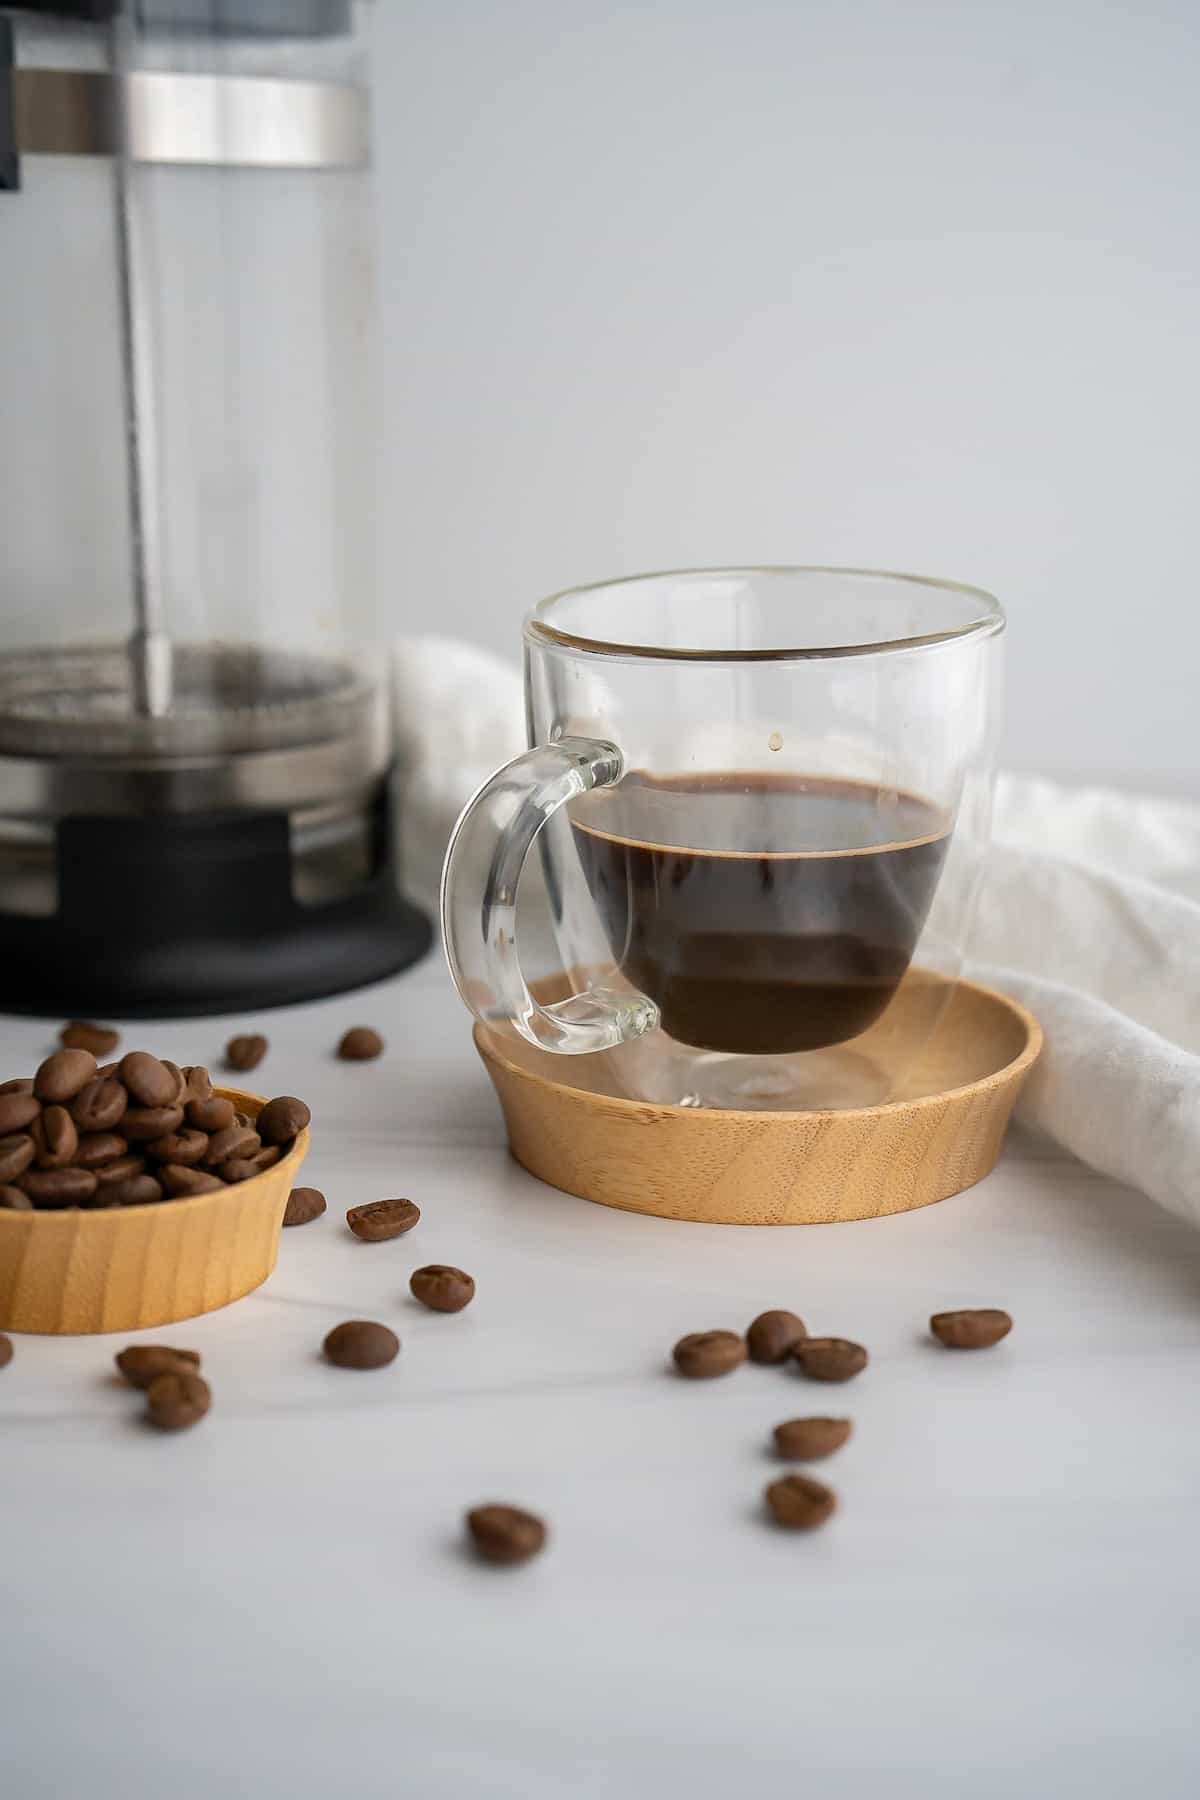 A double shot of french press espresso in a clear glass espresso cup with the french press beside it.